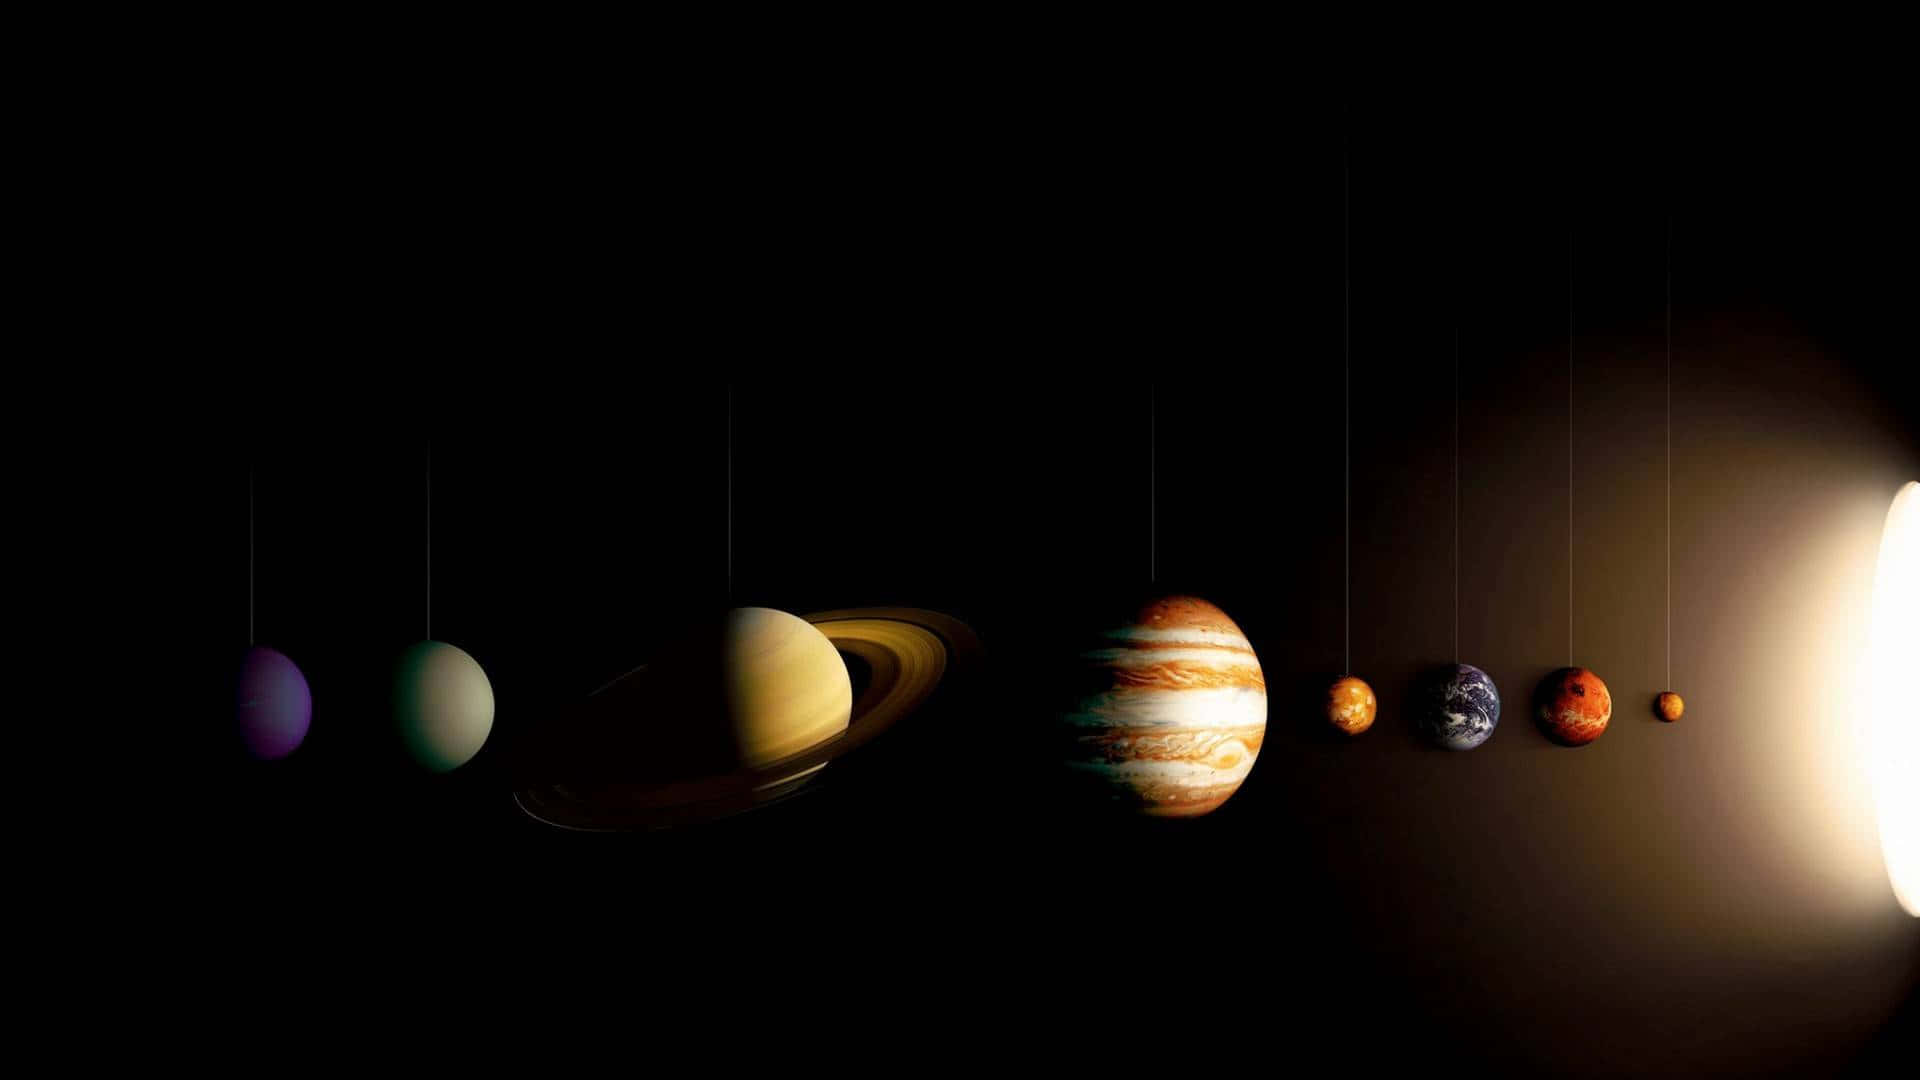 A vast cosmic landscape of our solar system